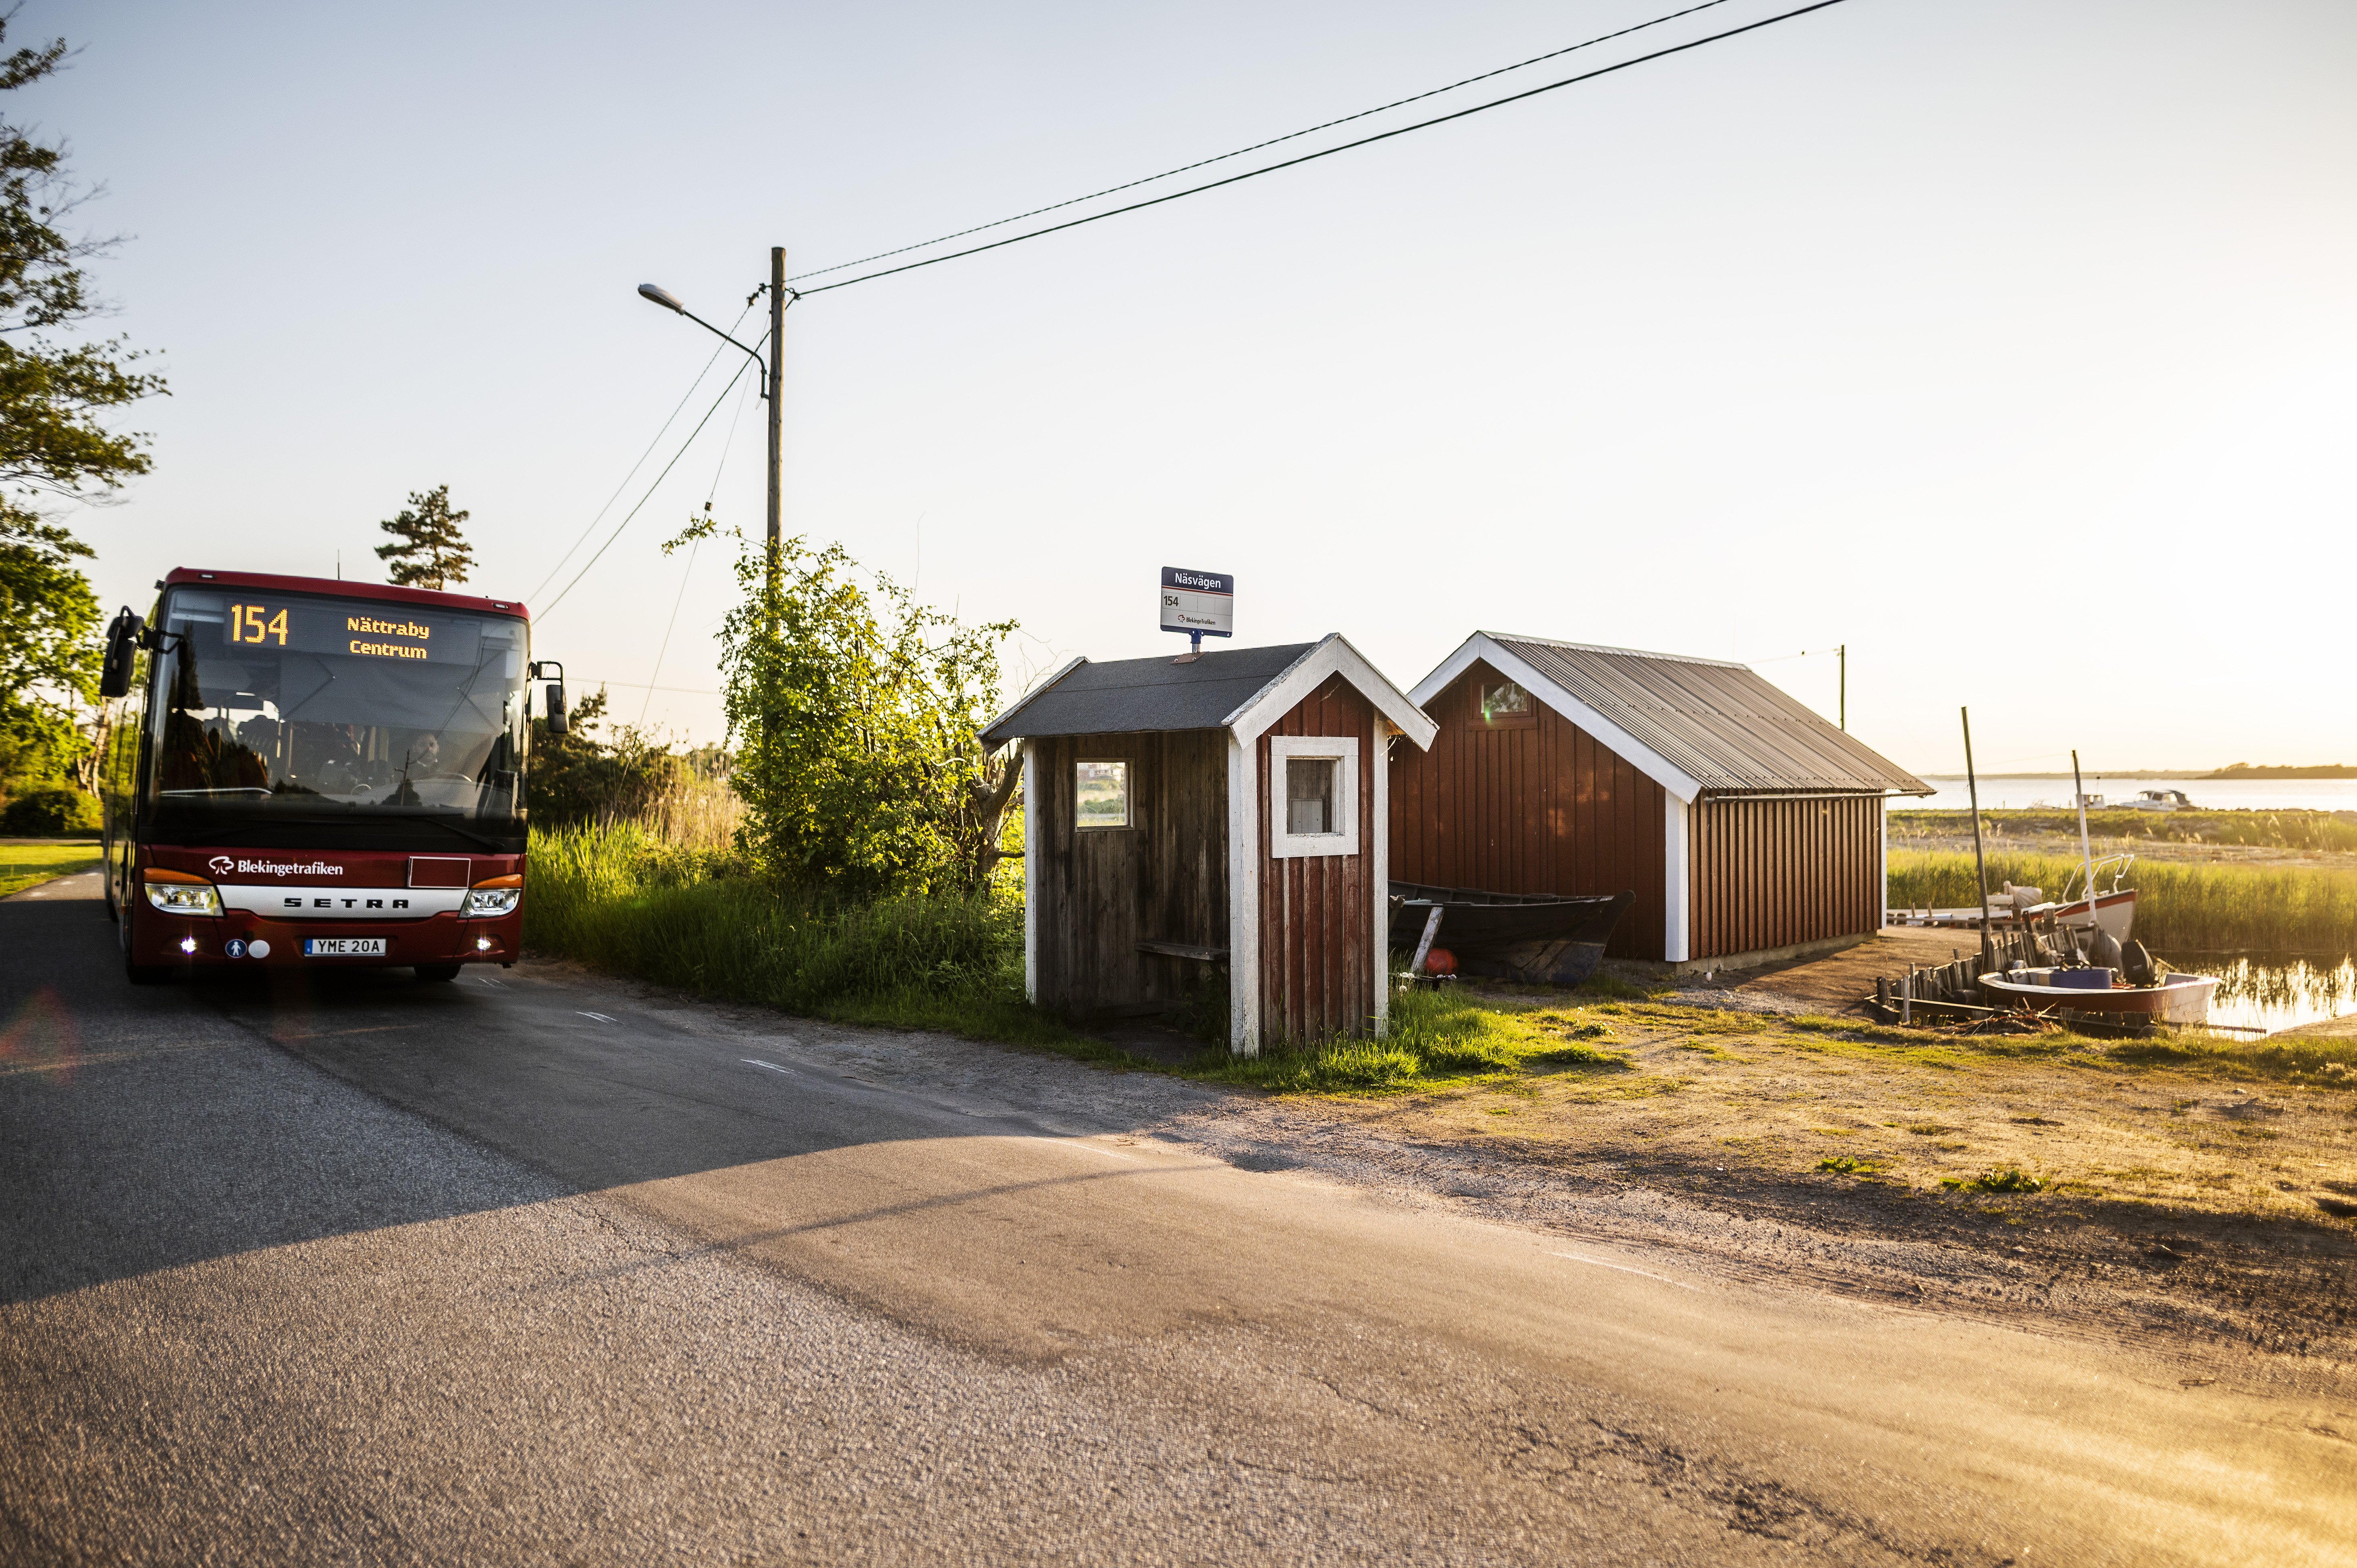 Bus, boat or train - travel to the Blekinge Archipelago and around the area with public transport and protect the environment